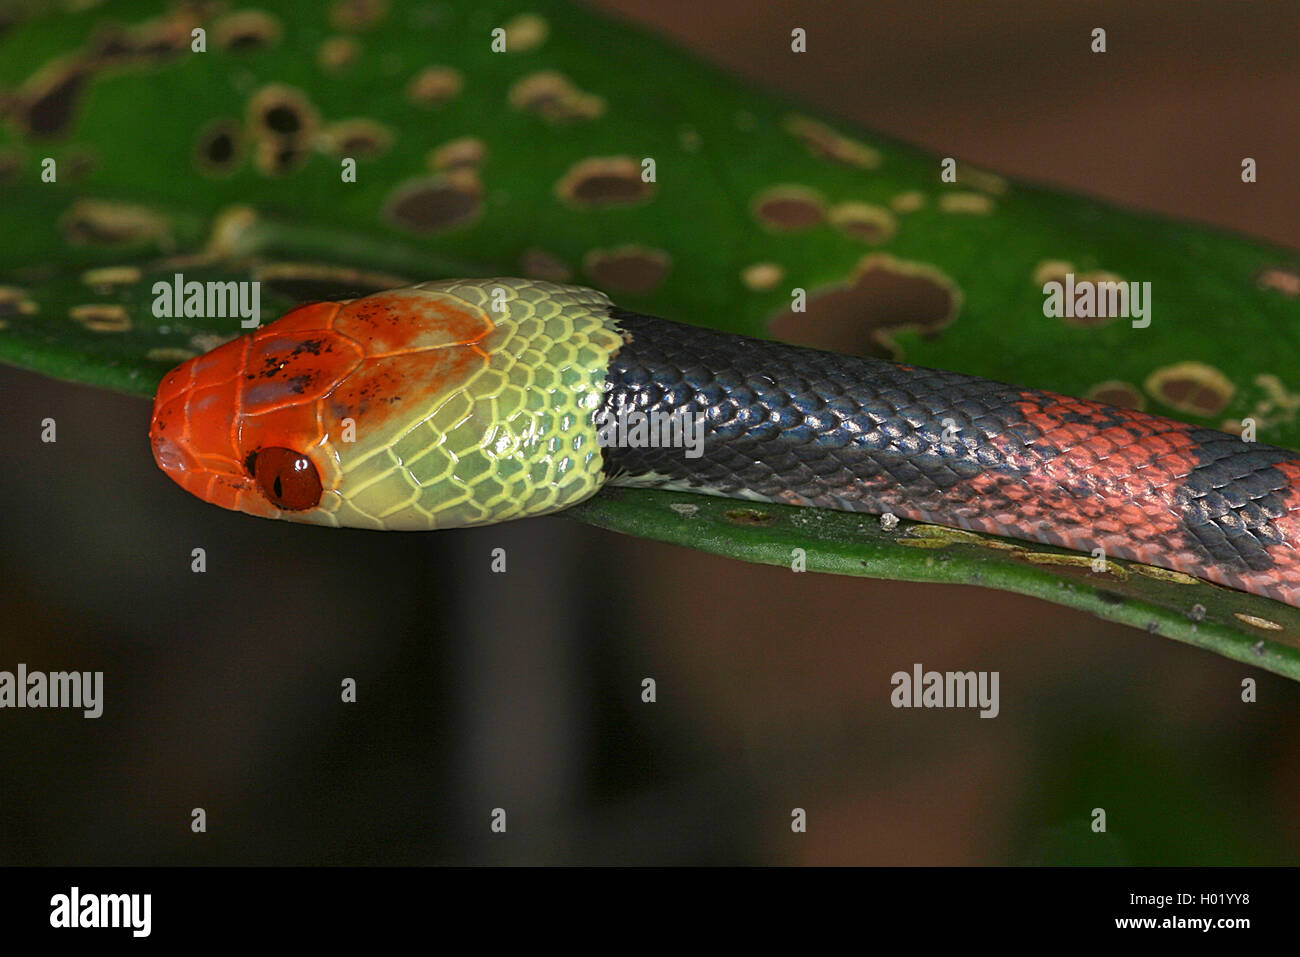 Red-eyed Tree snake (Siphlophis compressus), Ritratto, Costa Rica Foto Stock